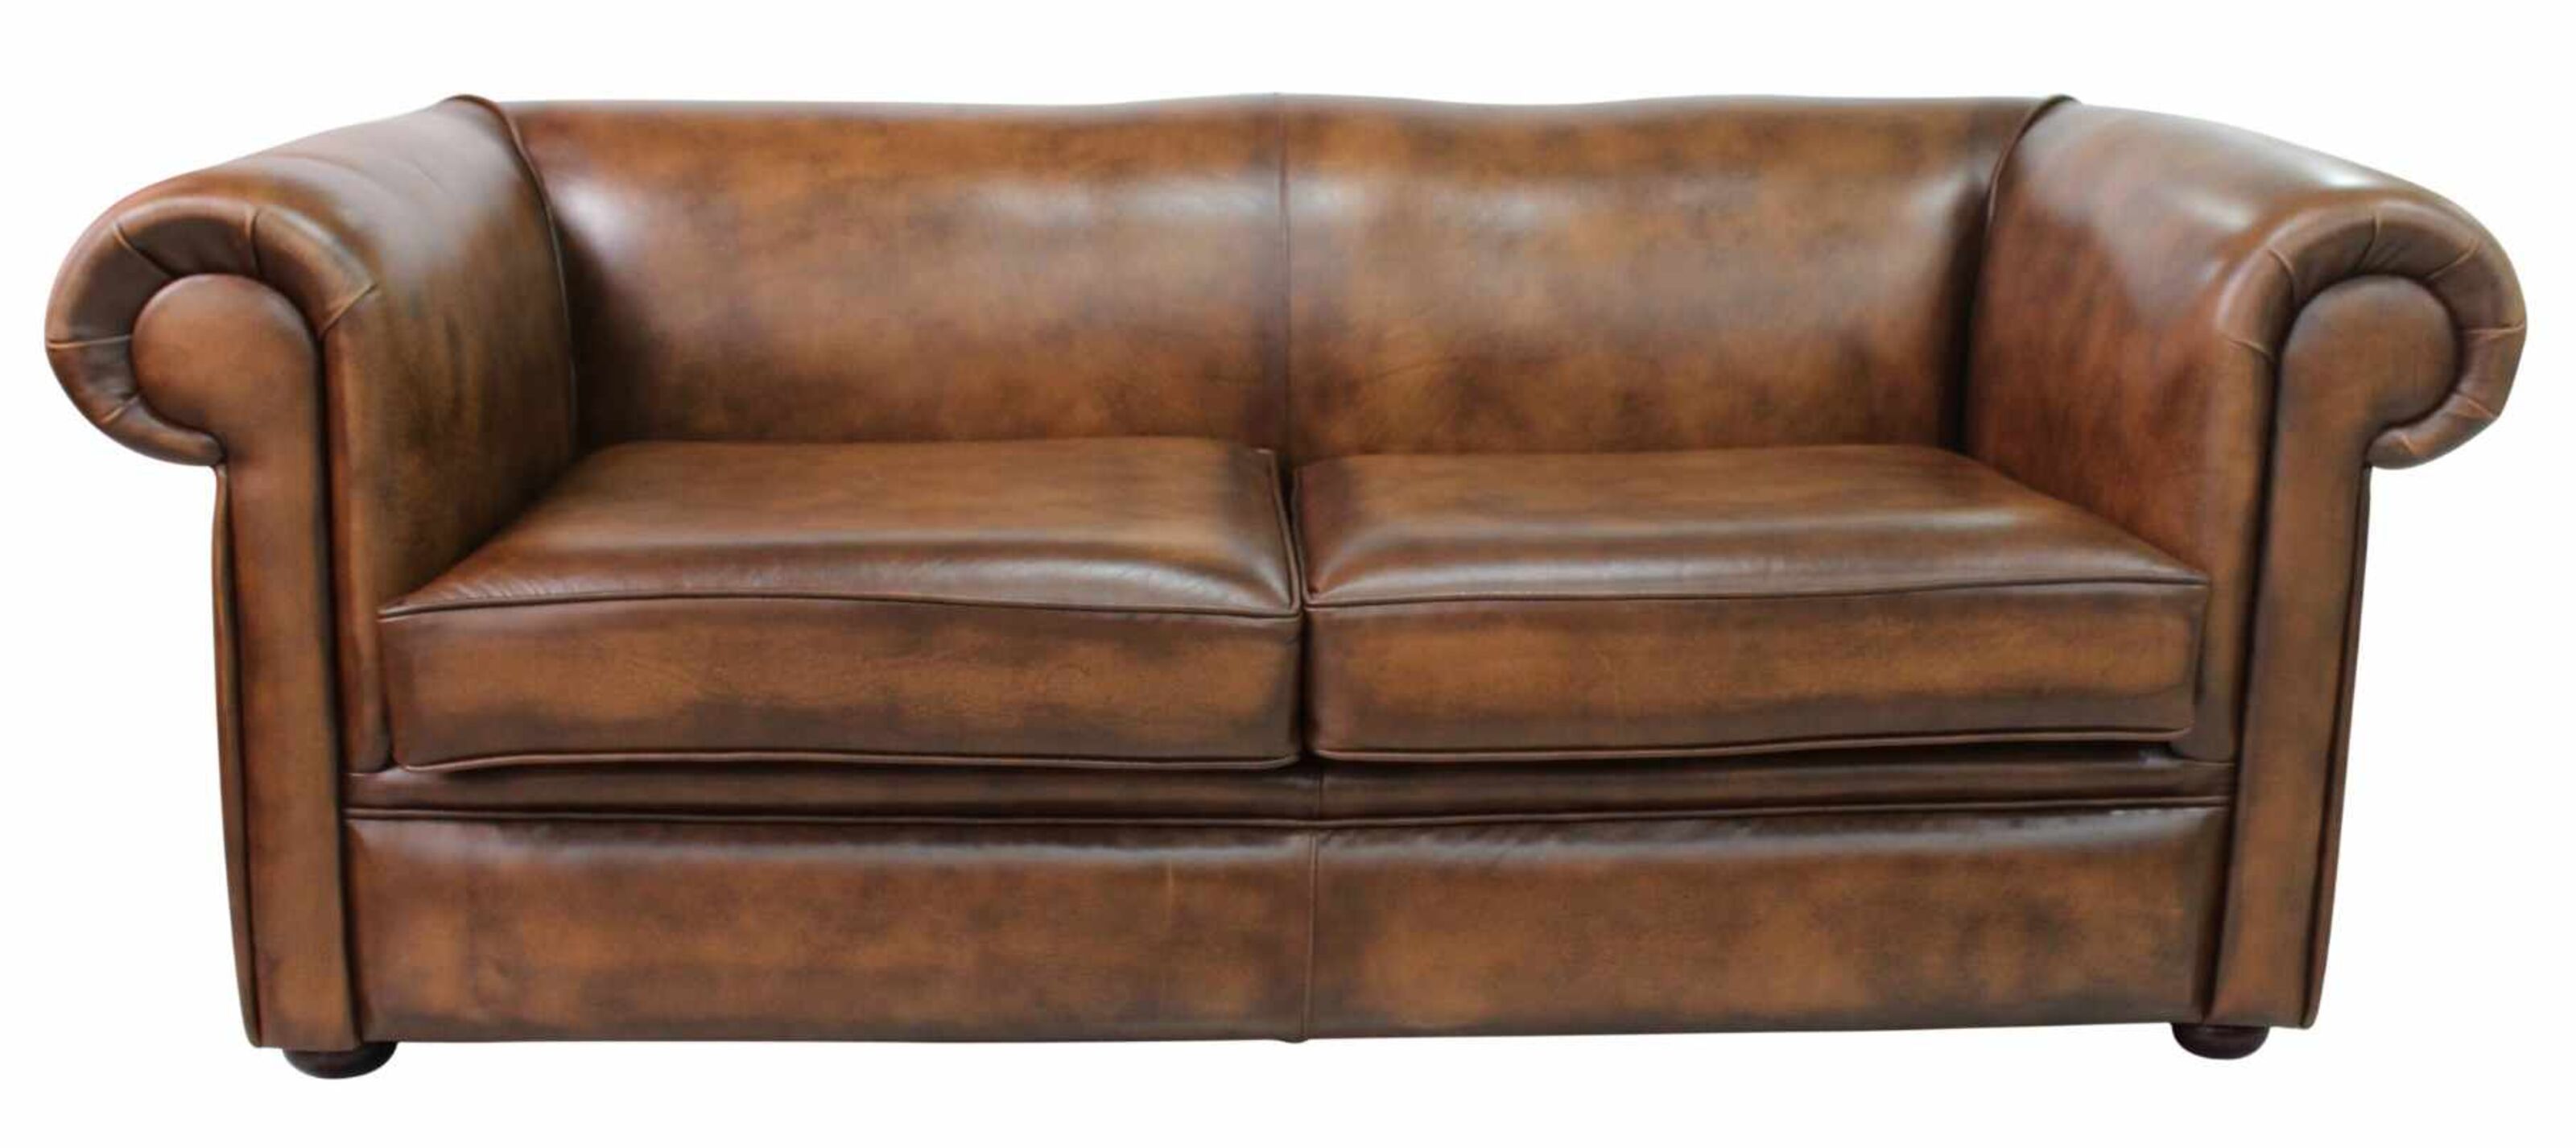 Classic Comfort Explore Available Chesterfield Armchairs for Purchase  %Post Title